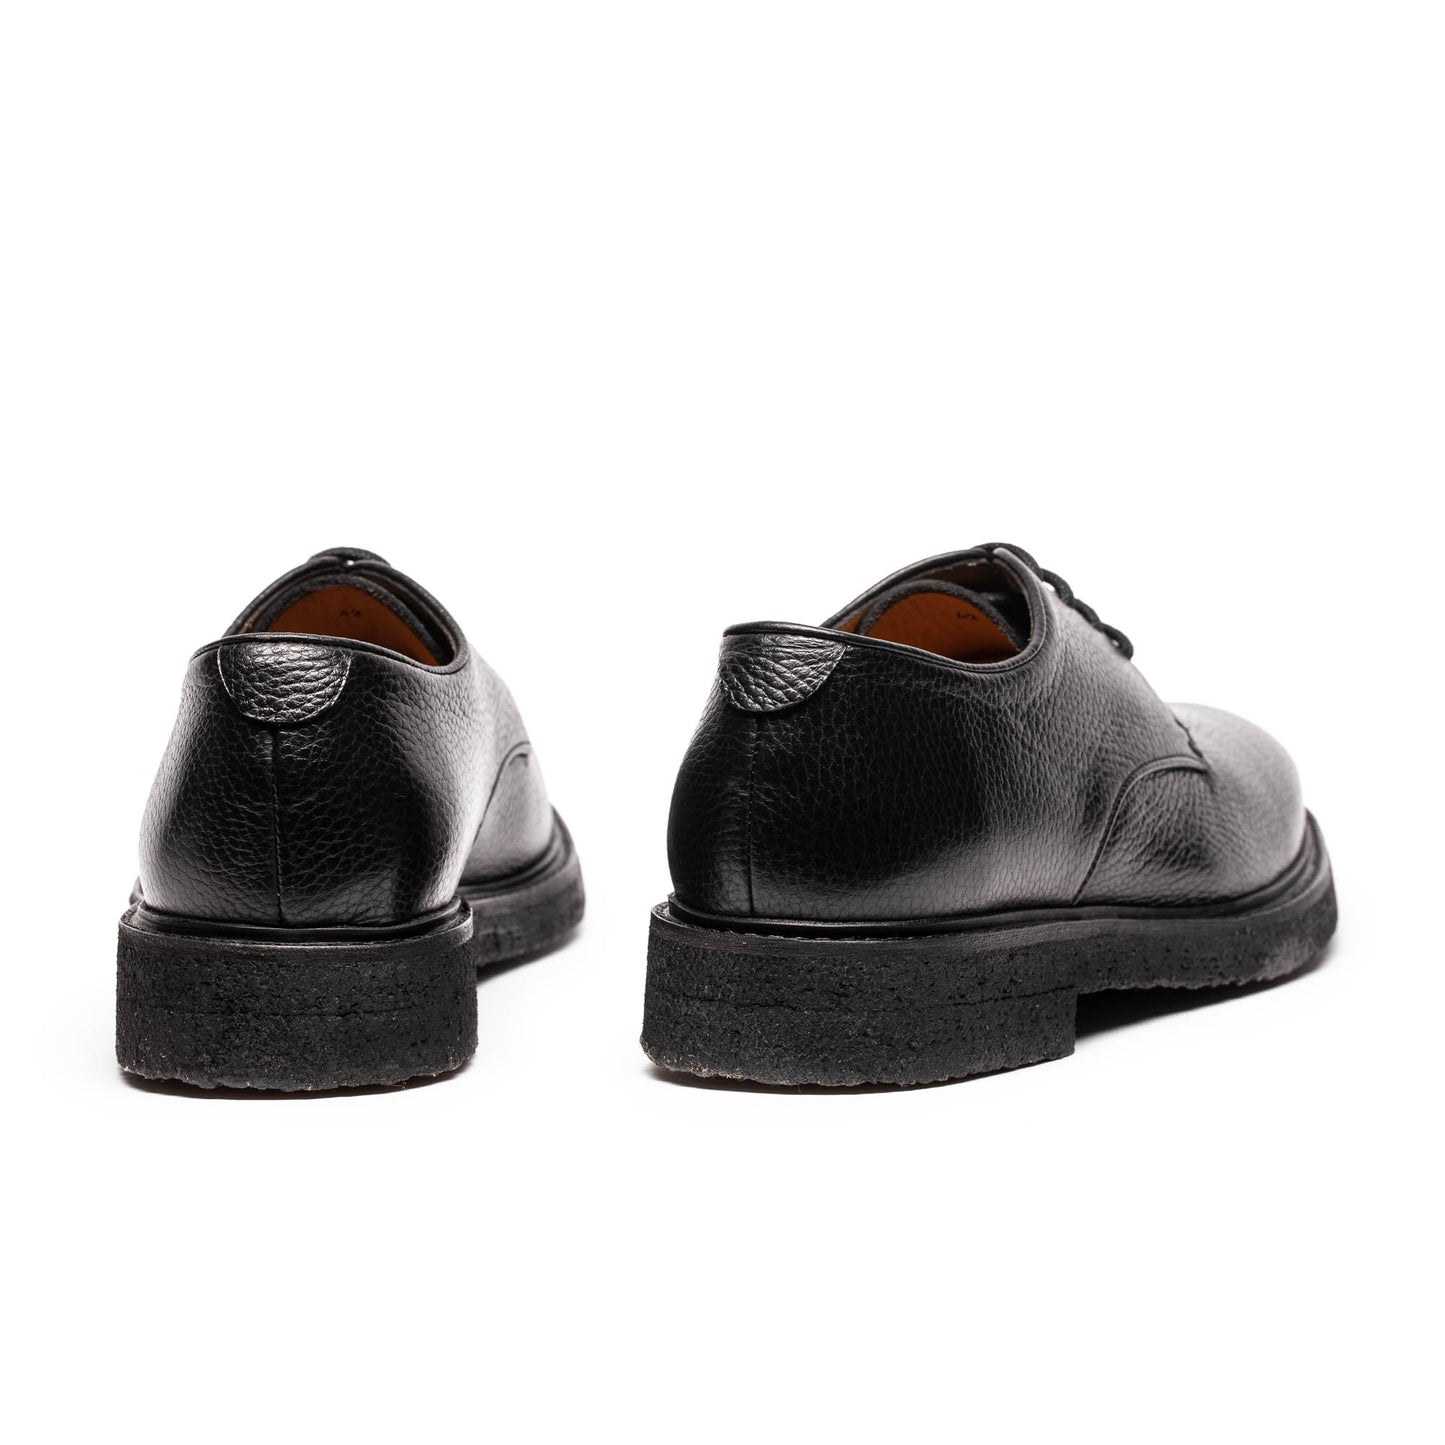 PABLO black | Black Leather Derby | Tracey Neuls